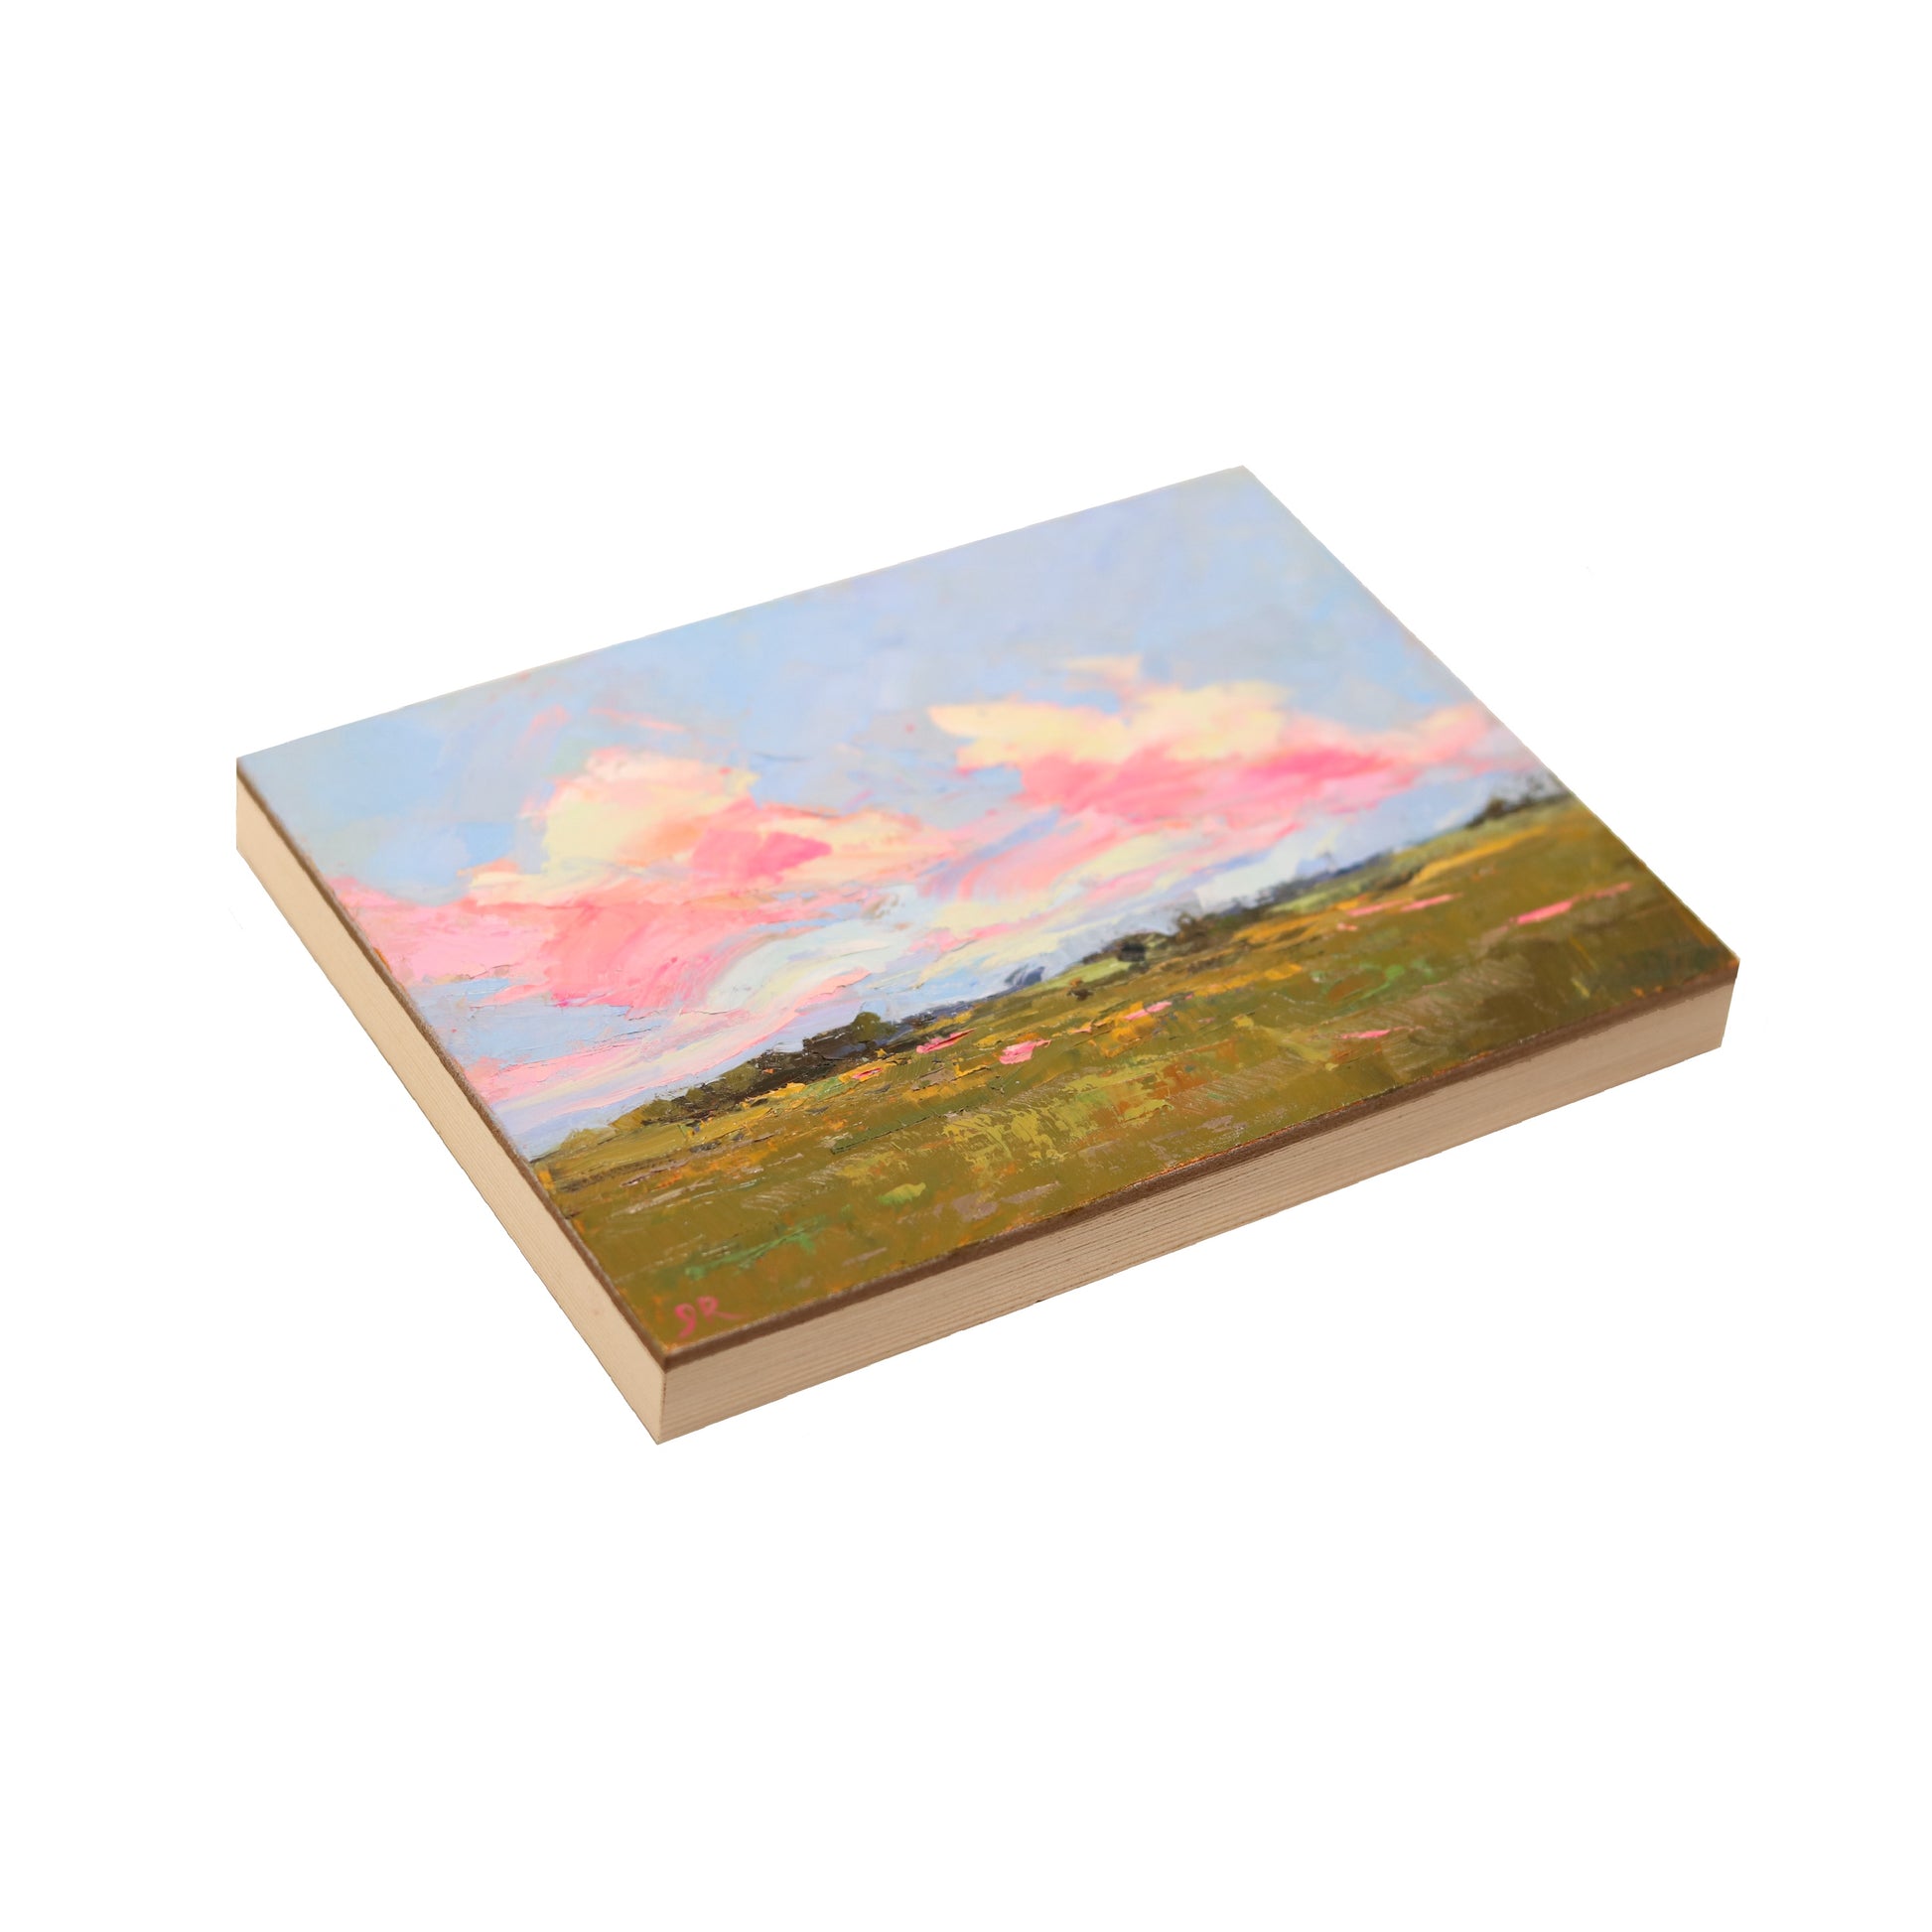 Oil painting  cradled panel, with textured paint of bright pastel pink and yellow clouds in blue sky, olive green landscape with tiny colored flowers on bottom. 